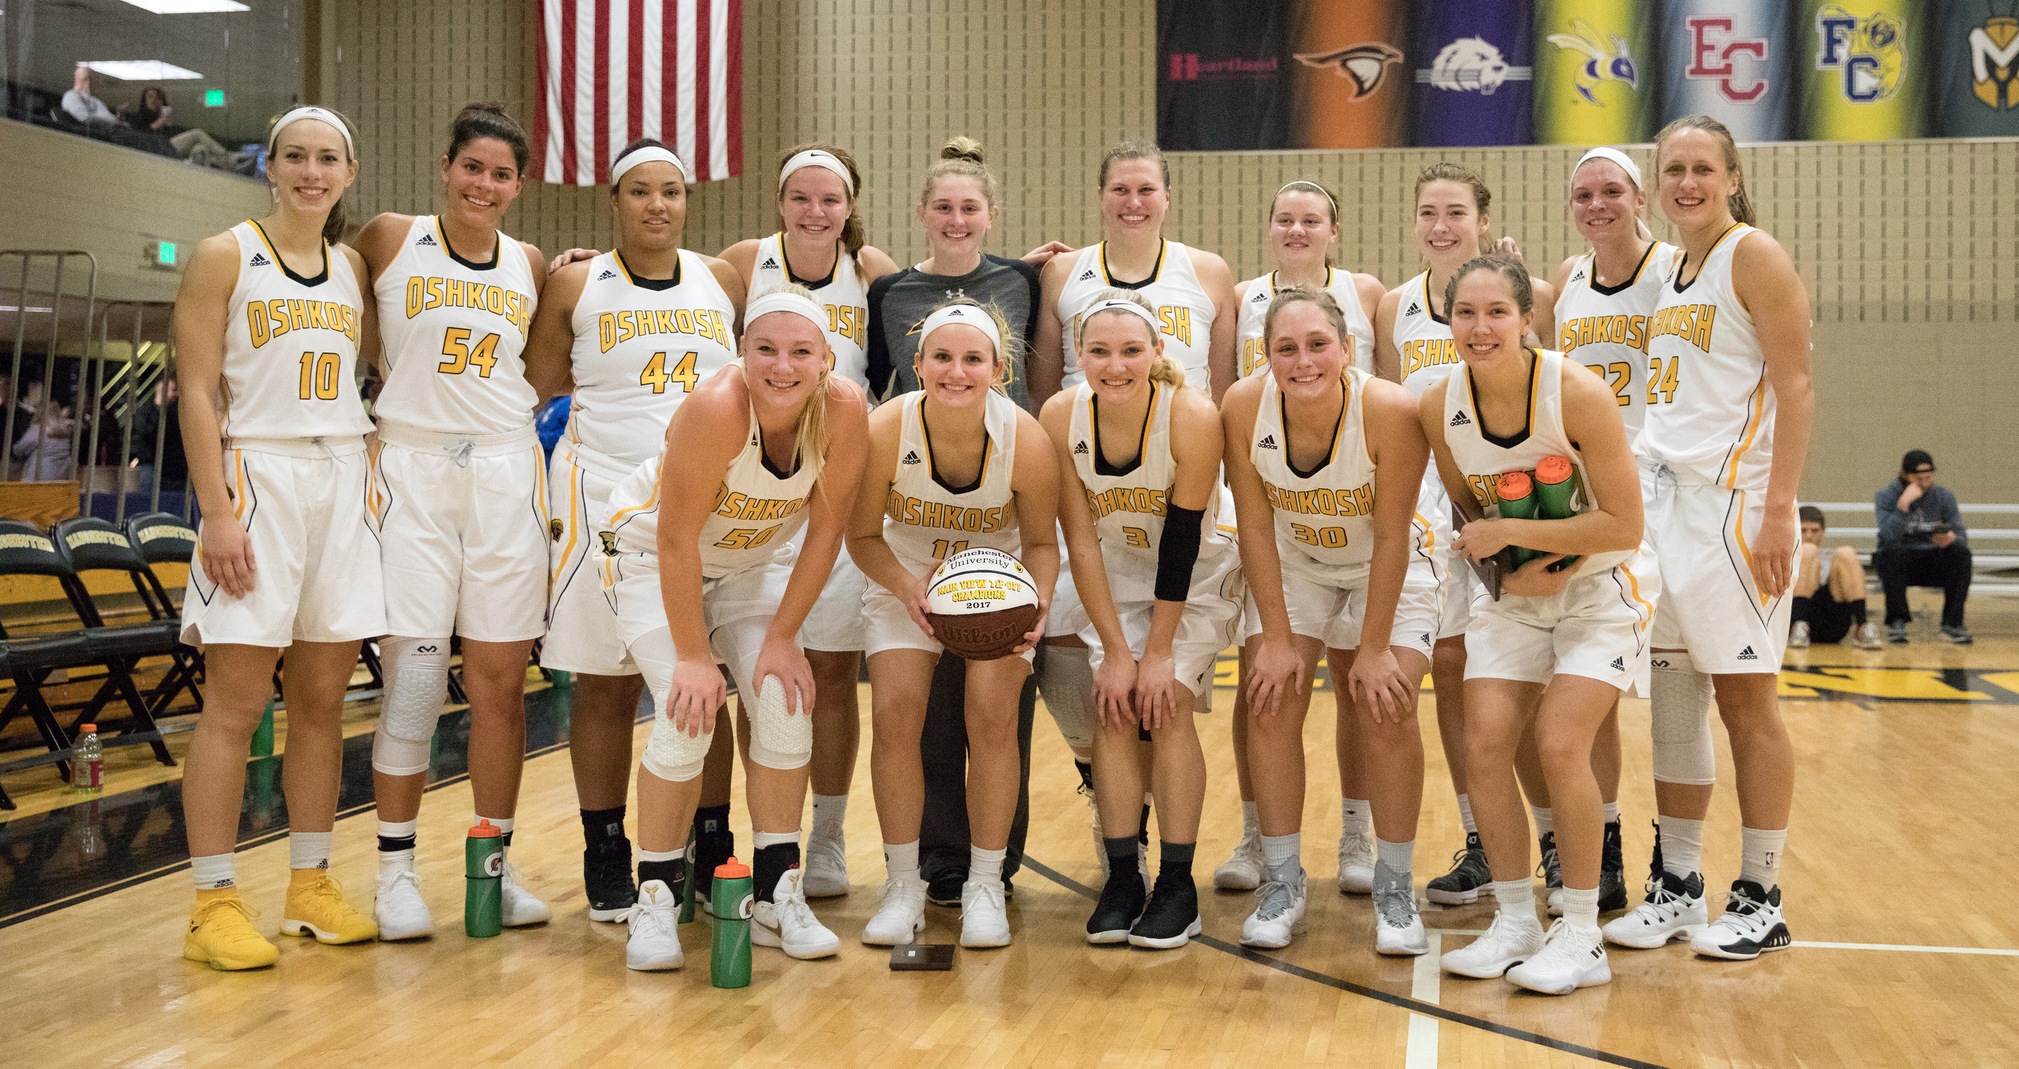 UW-Oshkosh outscored its two opponents by 97 points to win the Main View Tip-Off Tournament.